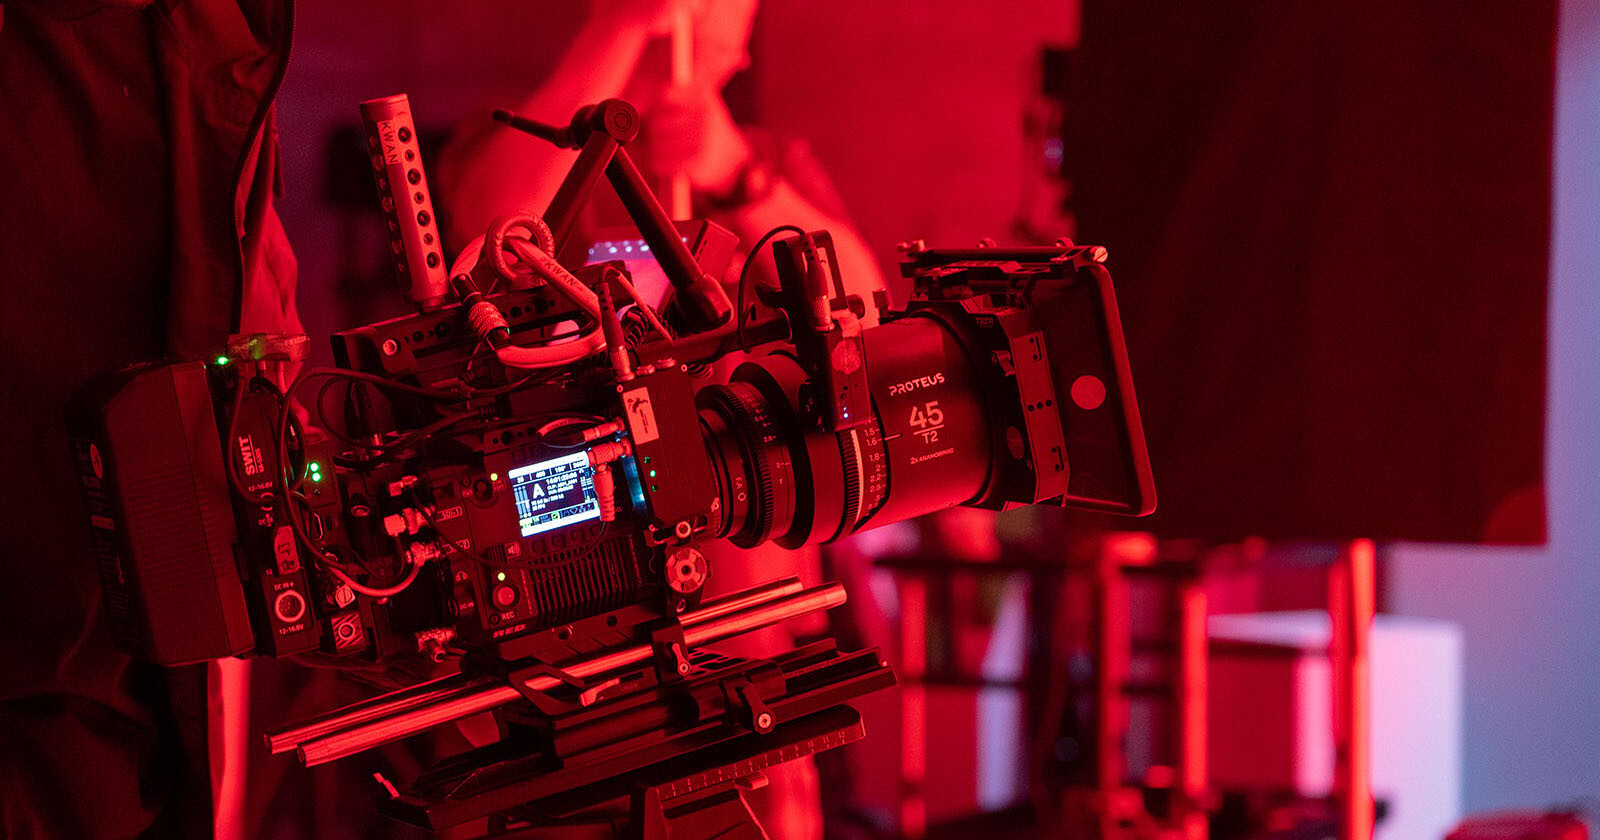  laowa four anamorphic lenses include widest-ever 